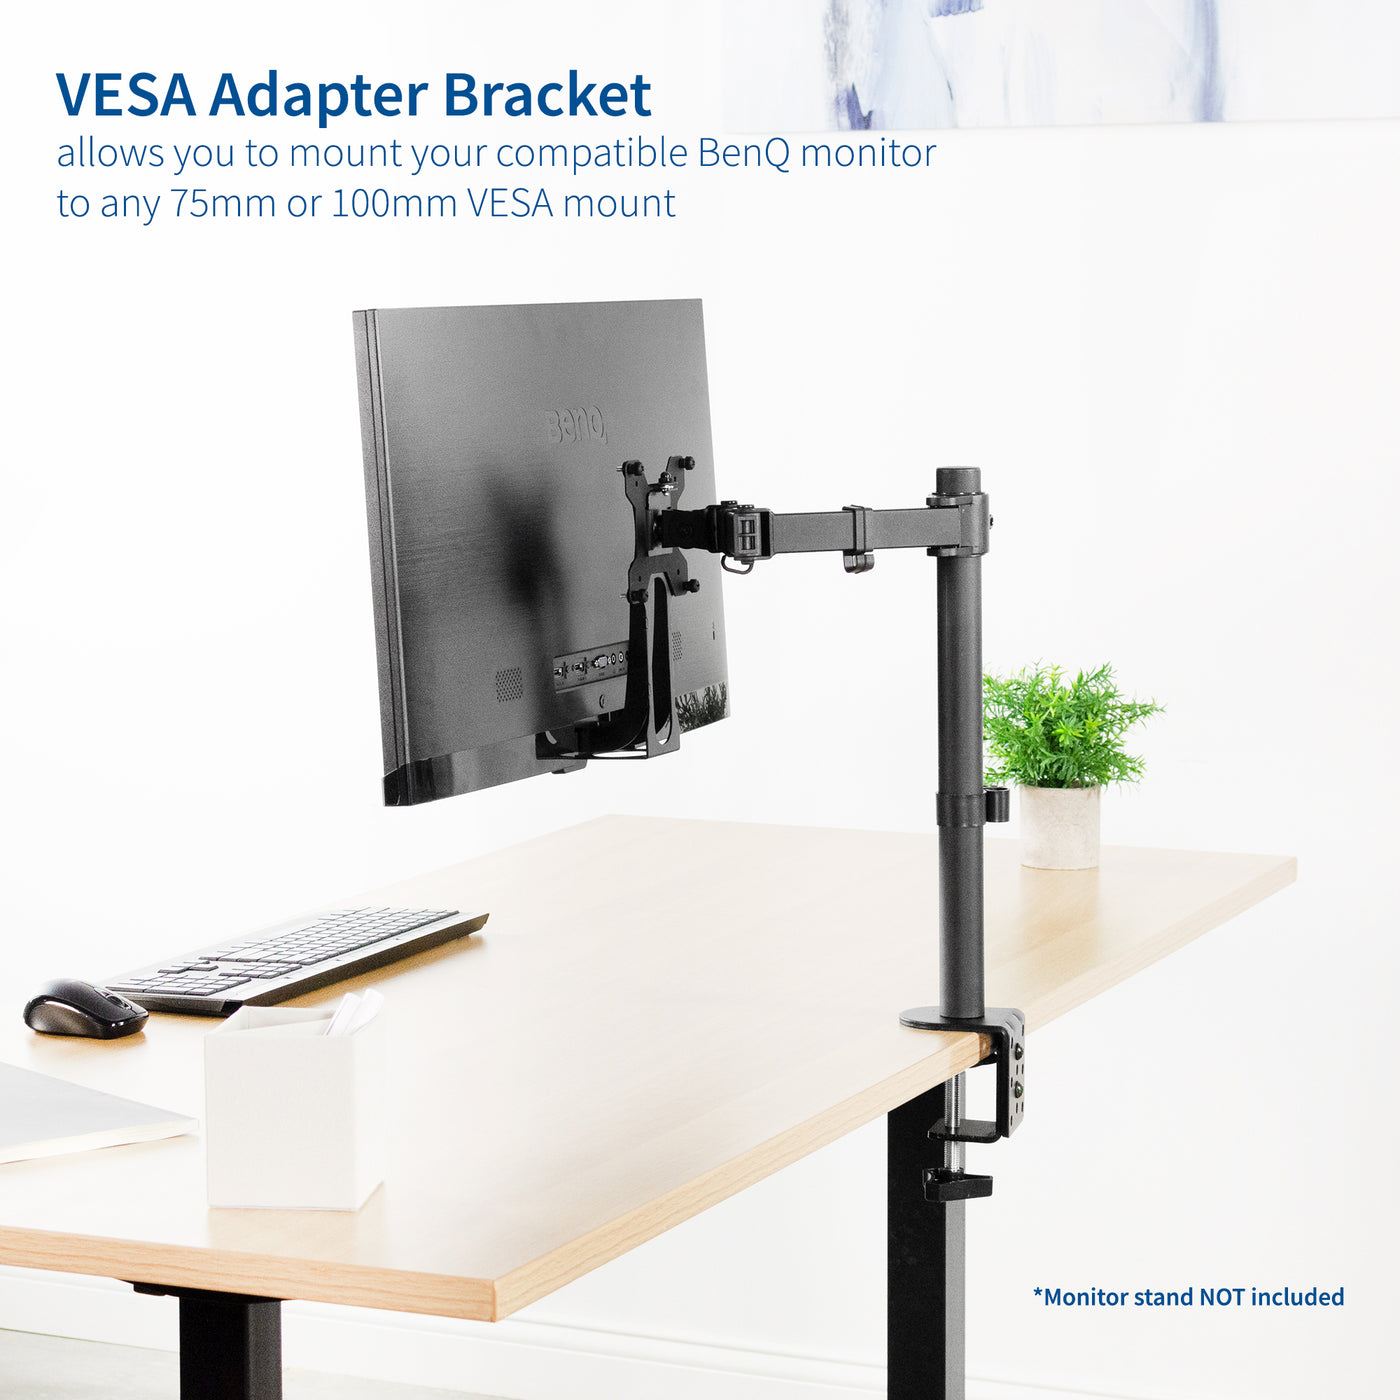 This VESA plate adapter bracket does not come with a stand.